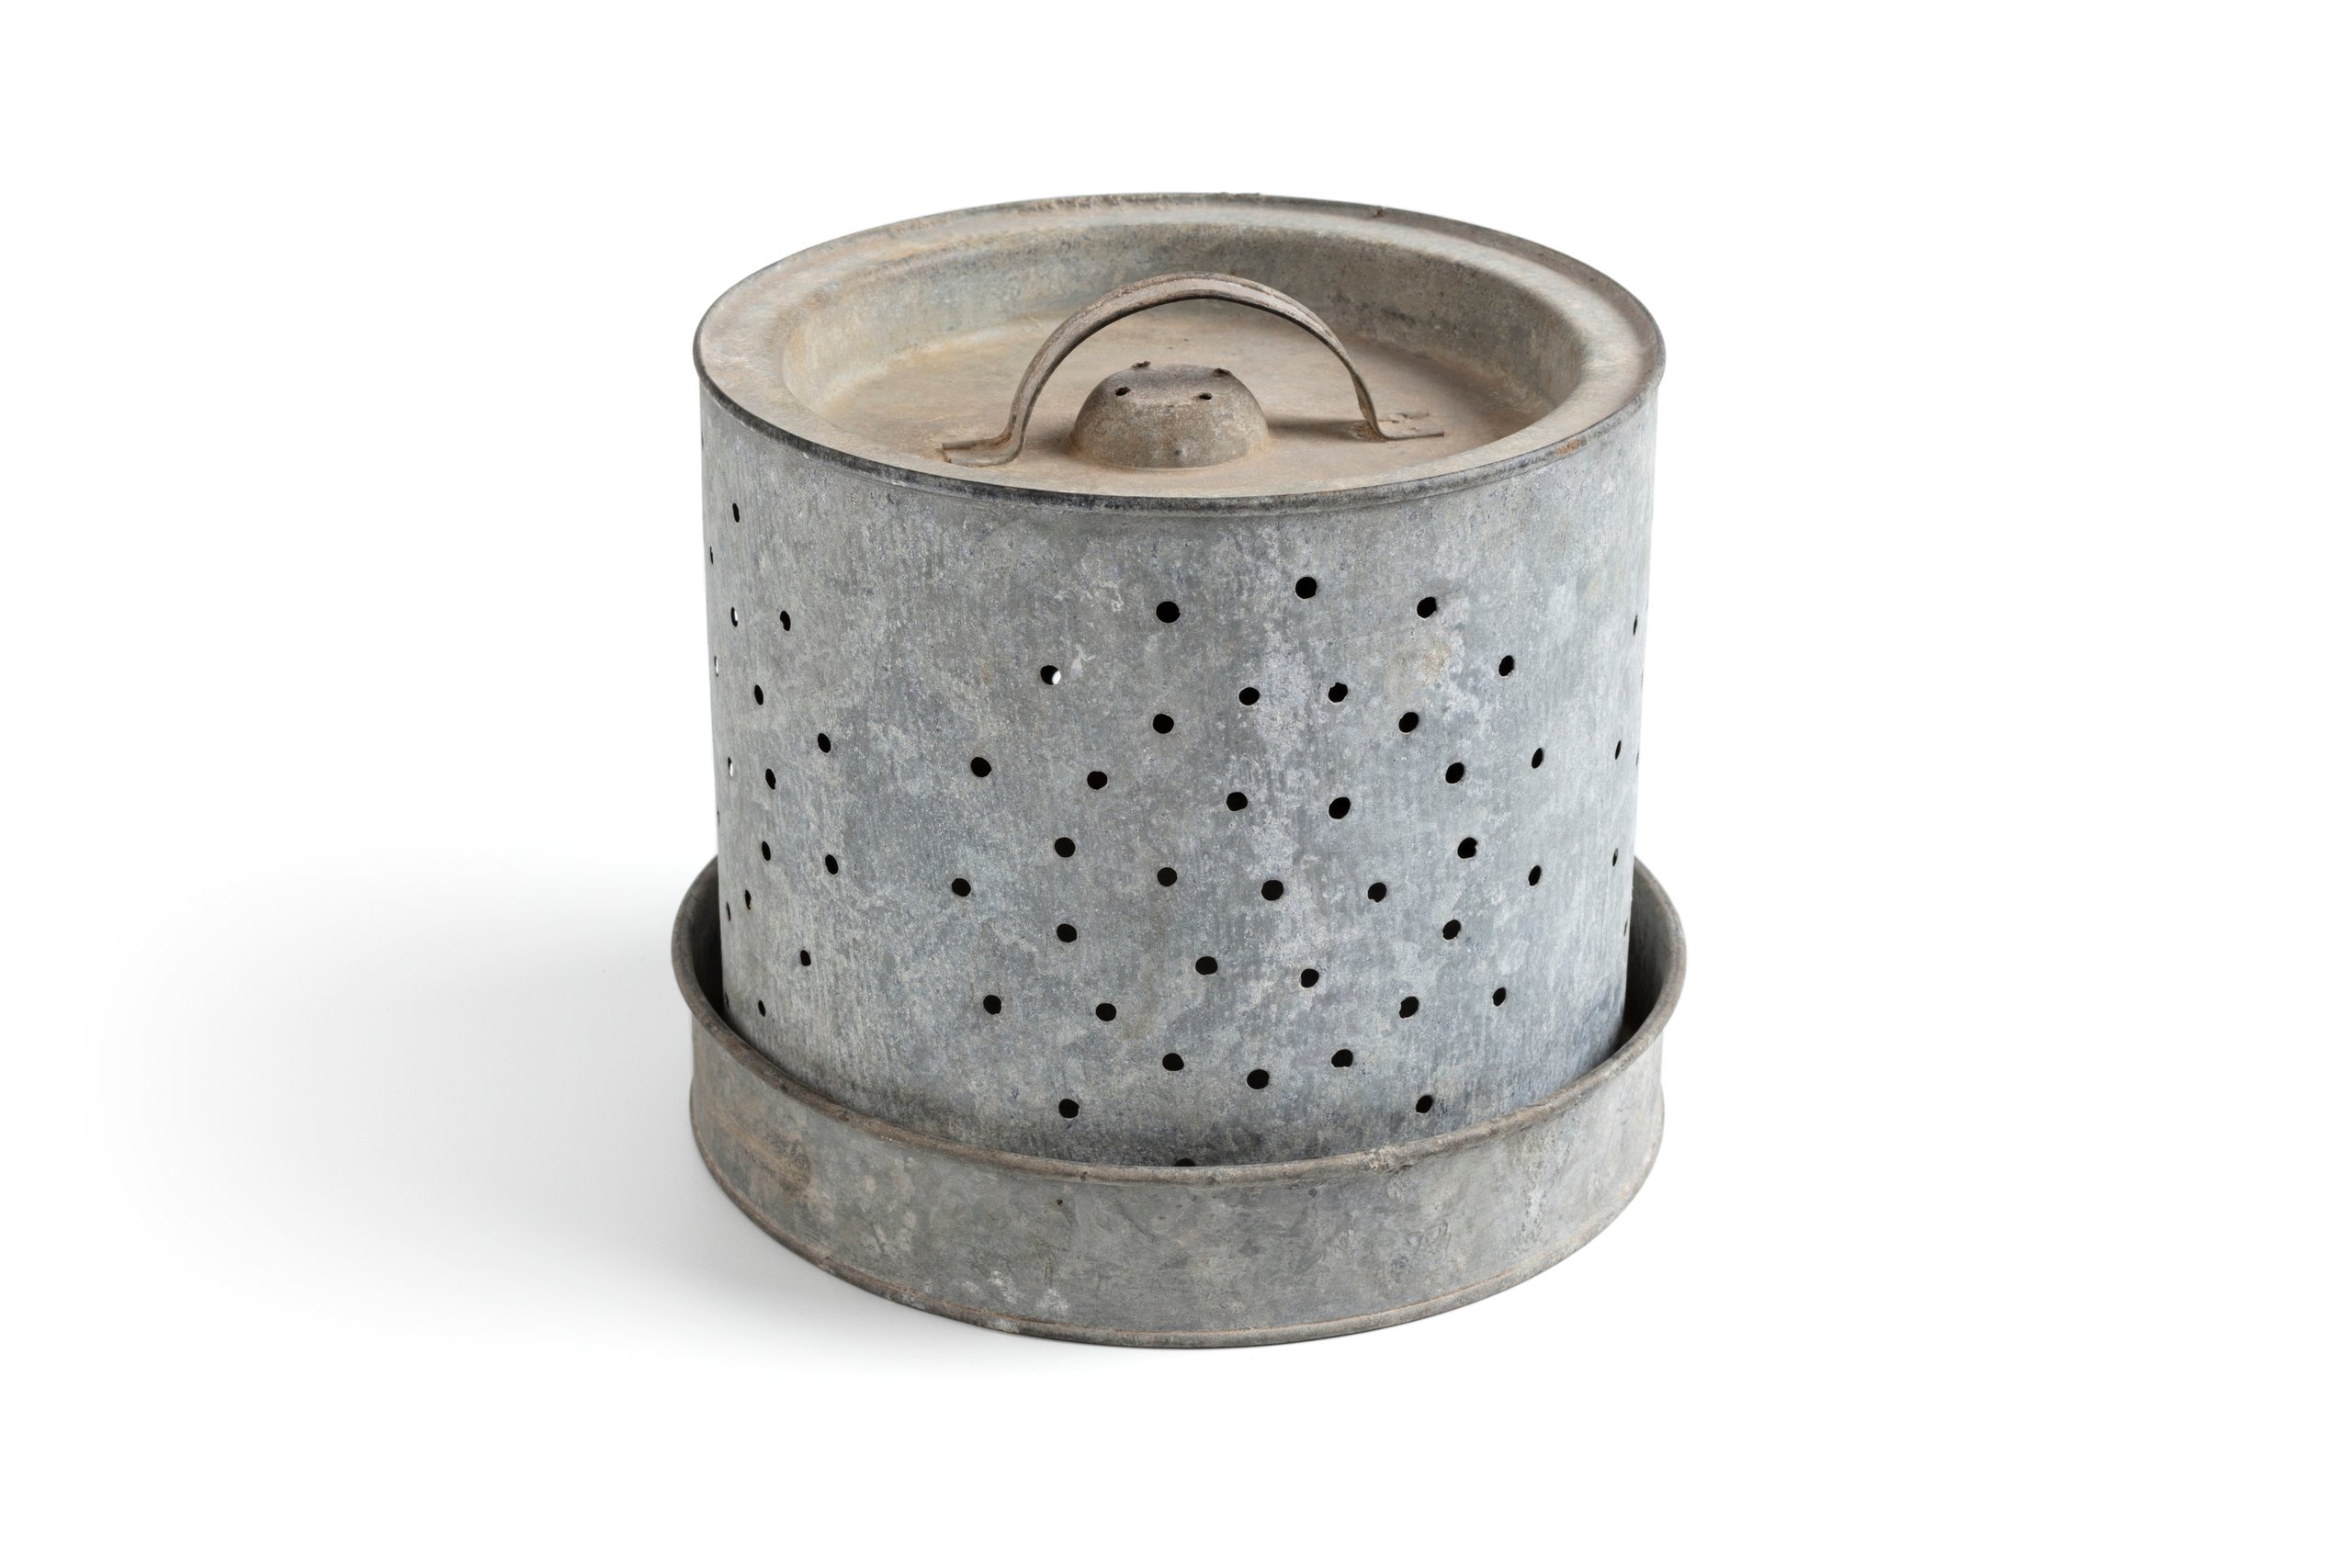 Galvanised metal butter cooler made by Willow